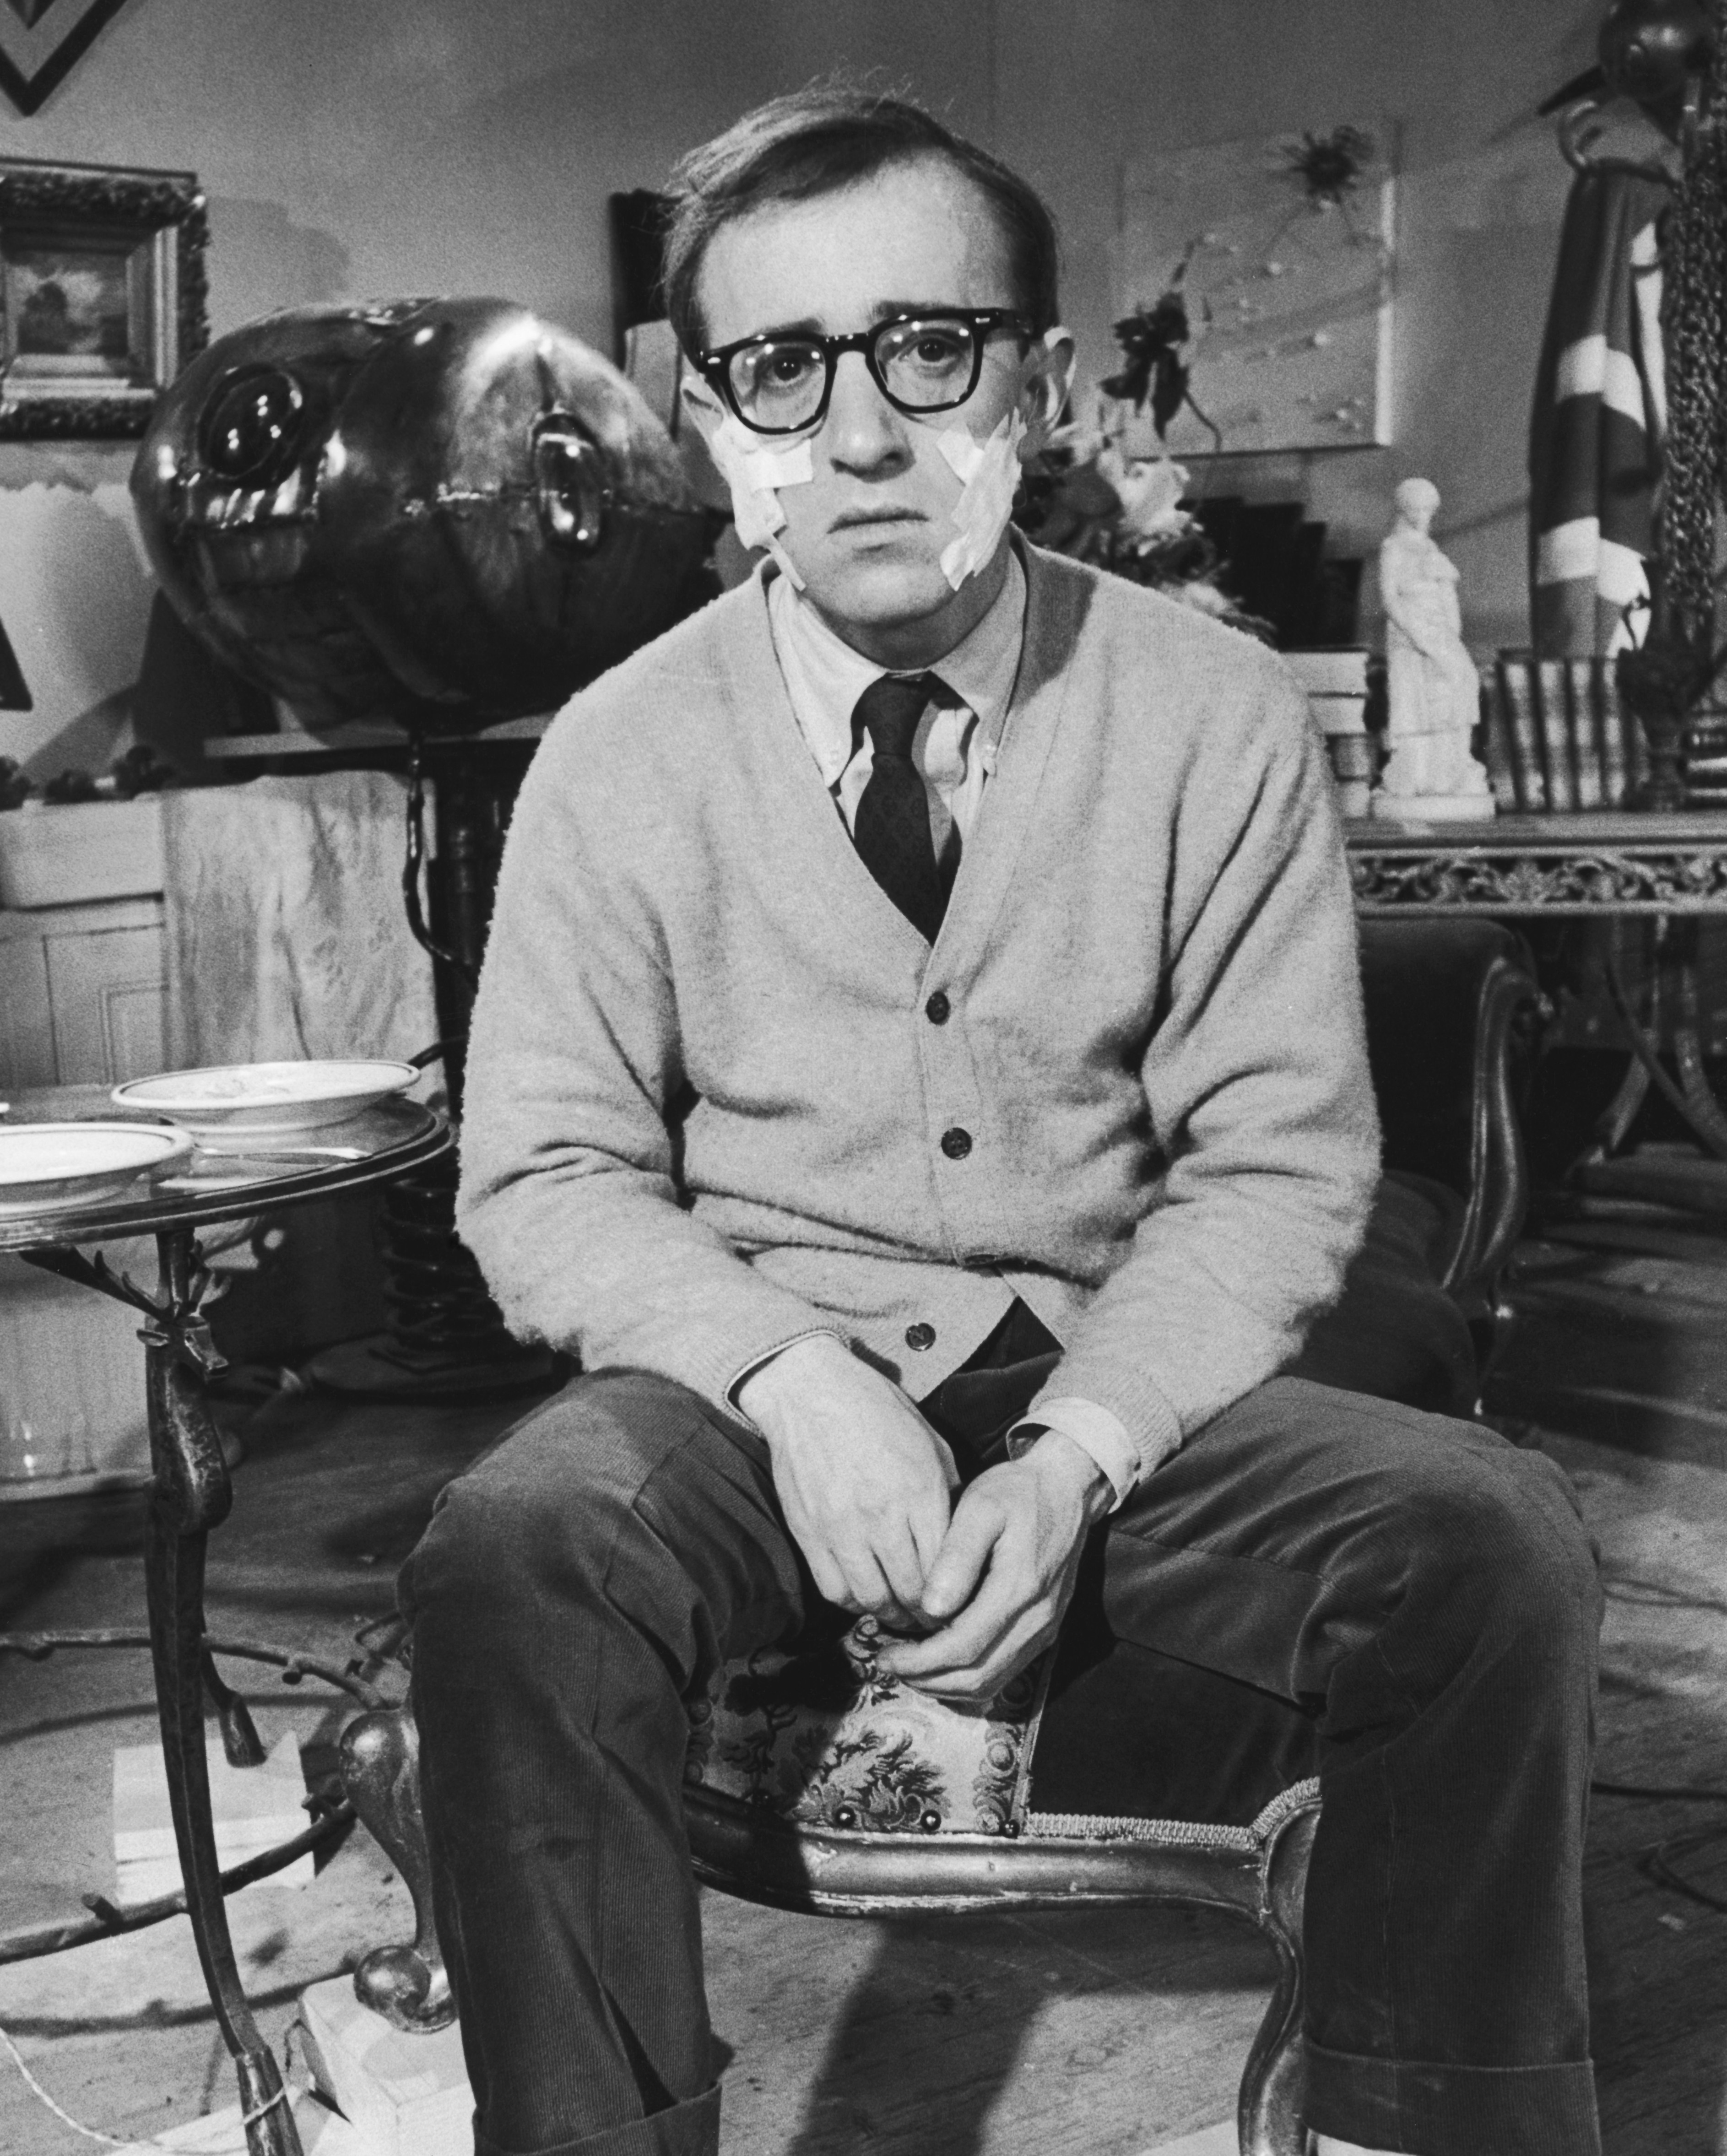 Woody Allen with surgical dressings on each cheek the during filming of "What's New, Pussycat" on January 1, 1965, in Paris, France. | Source: Getty Images